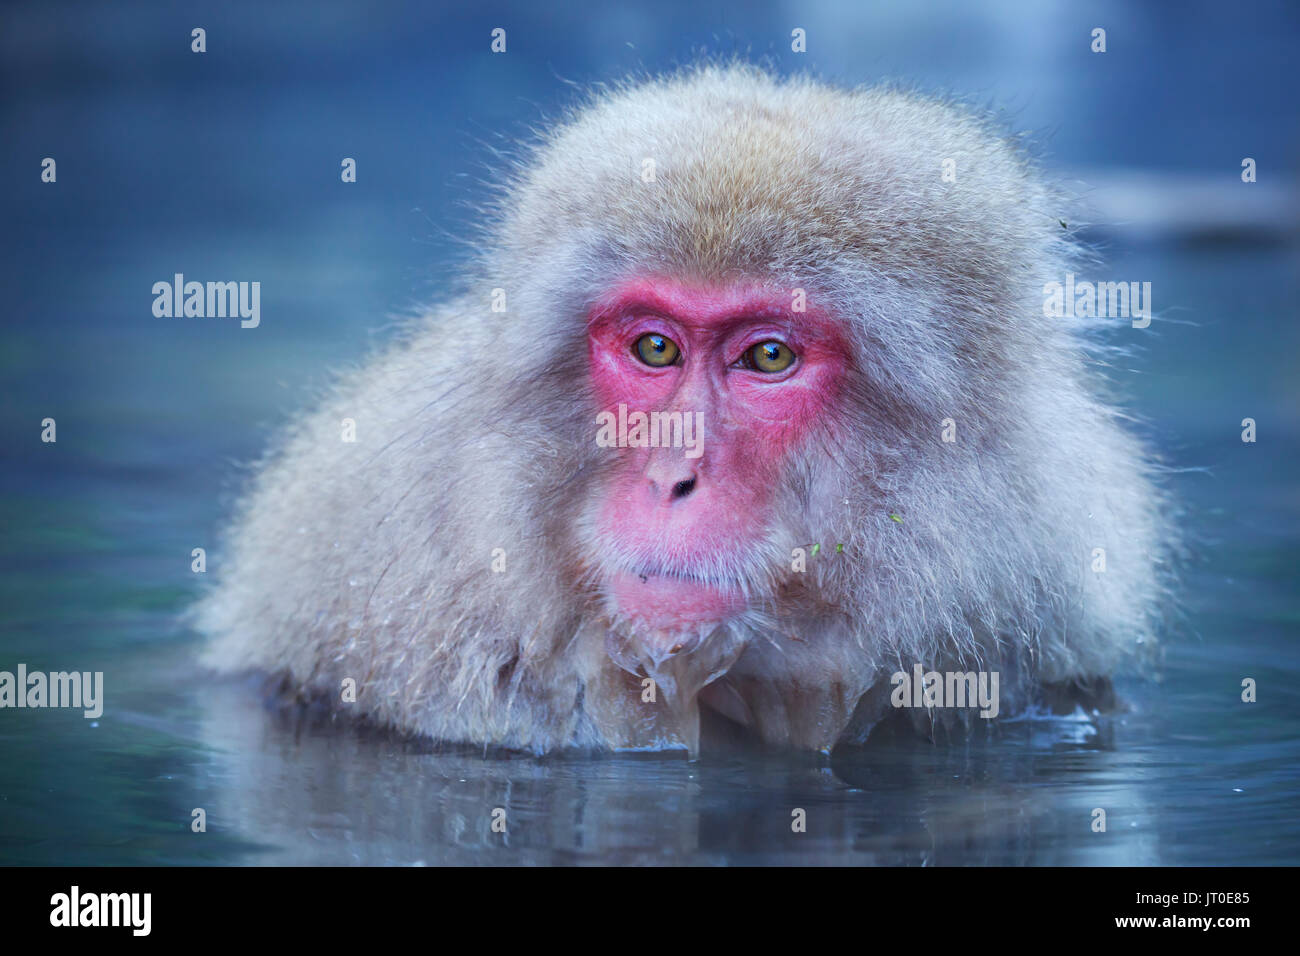 A snow monkey (Japanese macaque) sitting in the hot springs at Jigokudani Monkey Park. Stock Photo